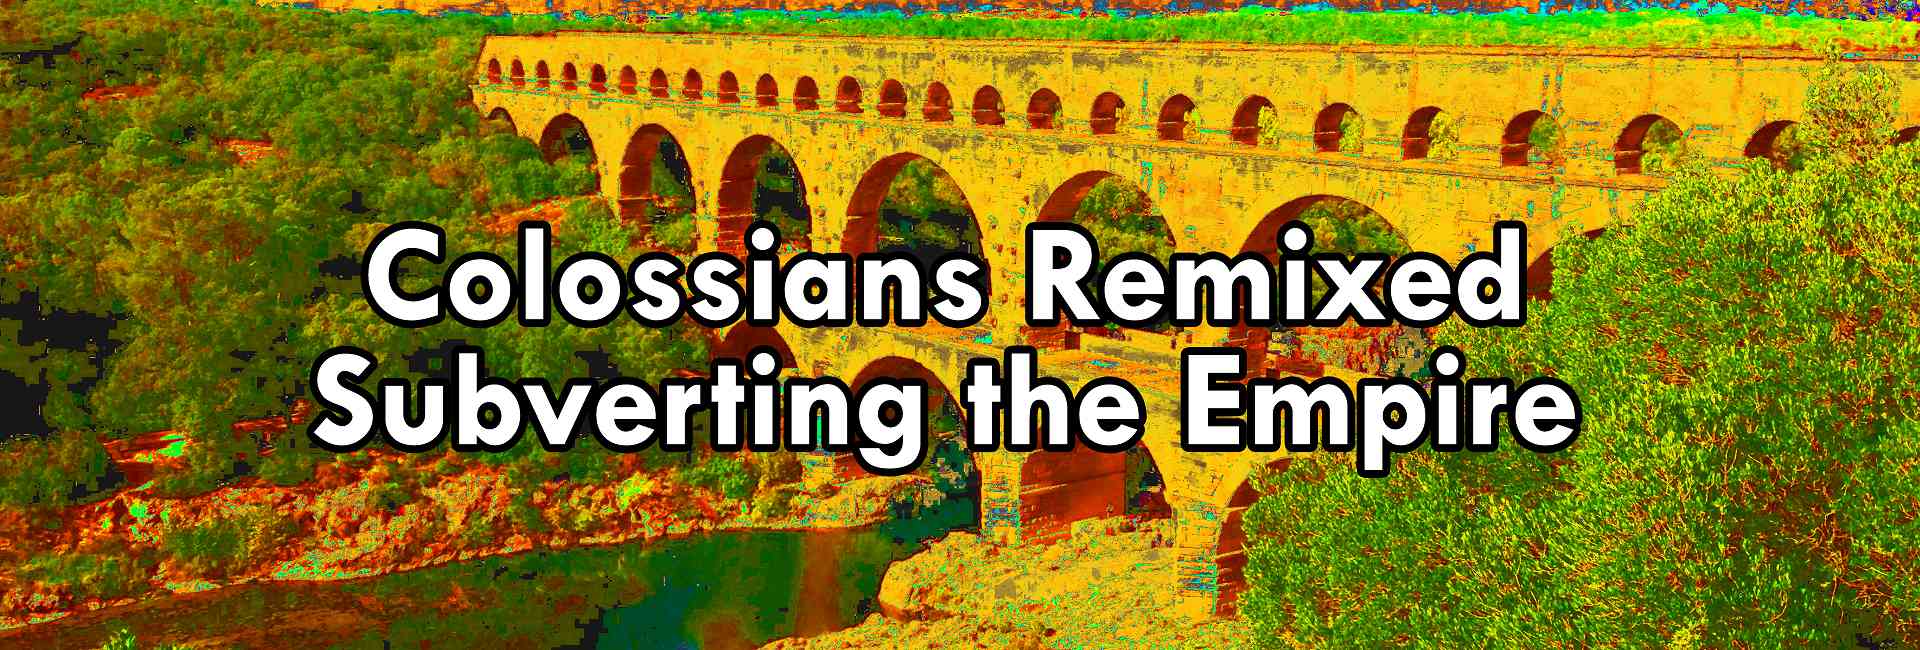 Colossians Remixed Subverting the Empire